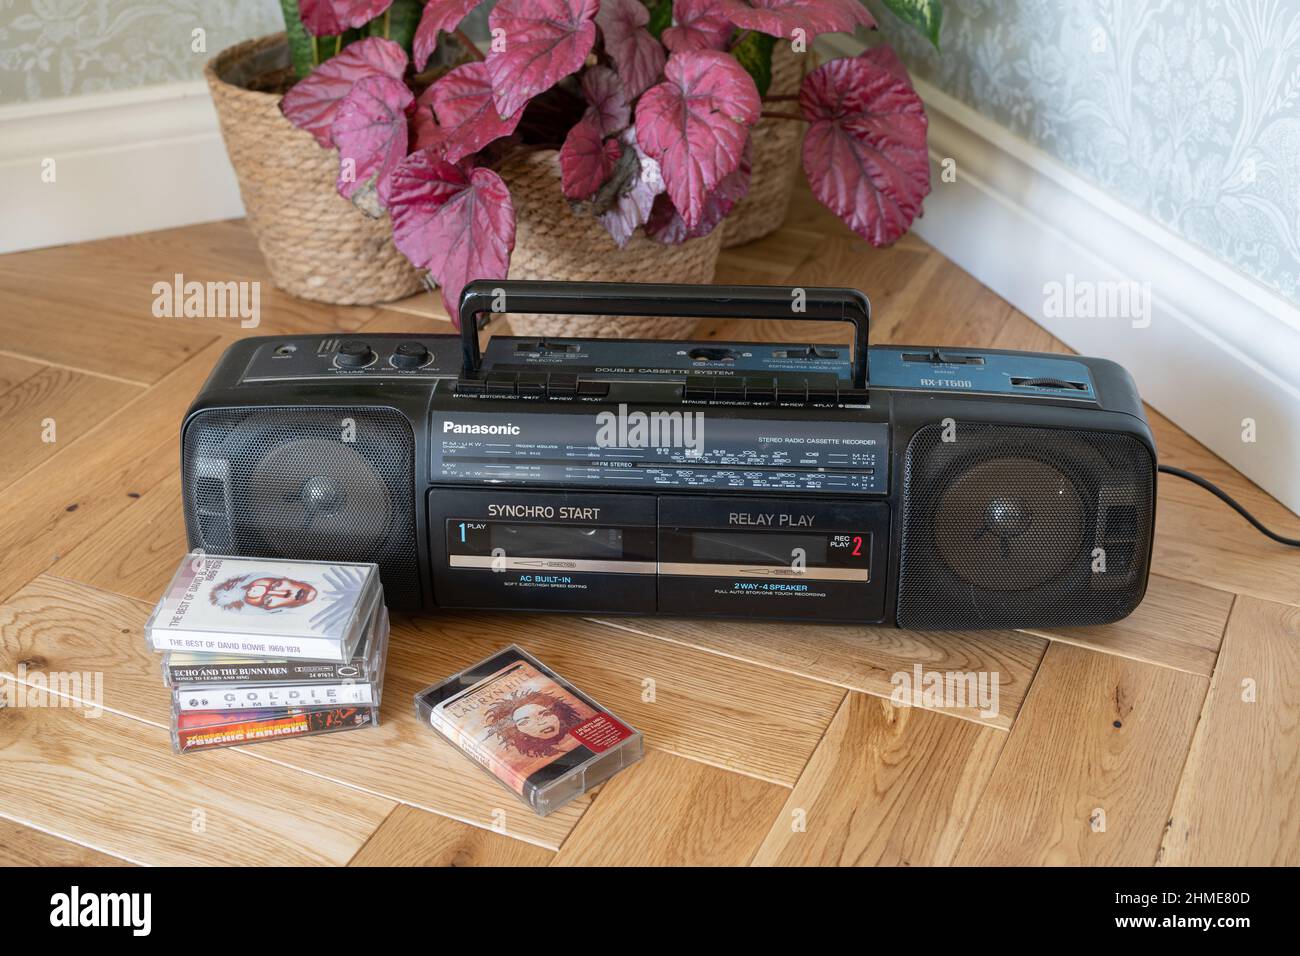 New Generation Nostalgia. Retro Resurgence. Young people discovering old music, dusting off the ghetto blaster to hear parents' cassettes. Stock Photo